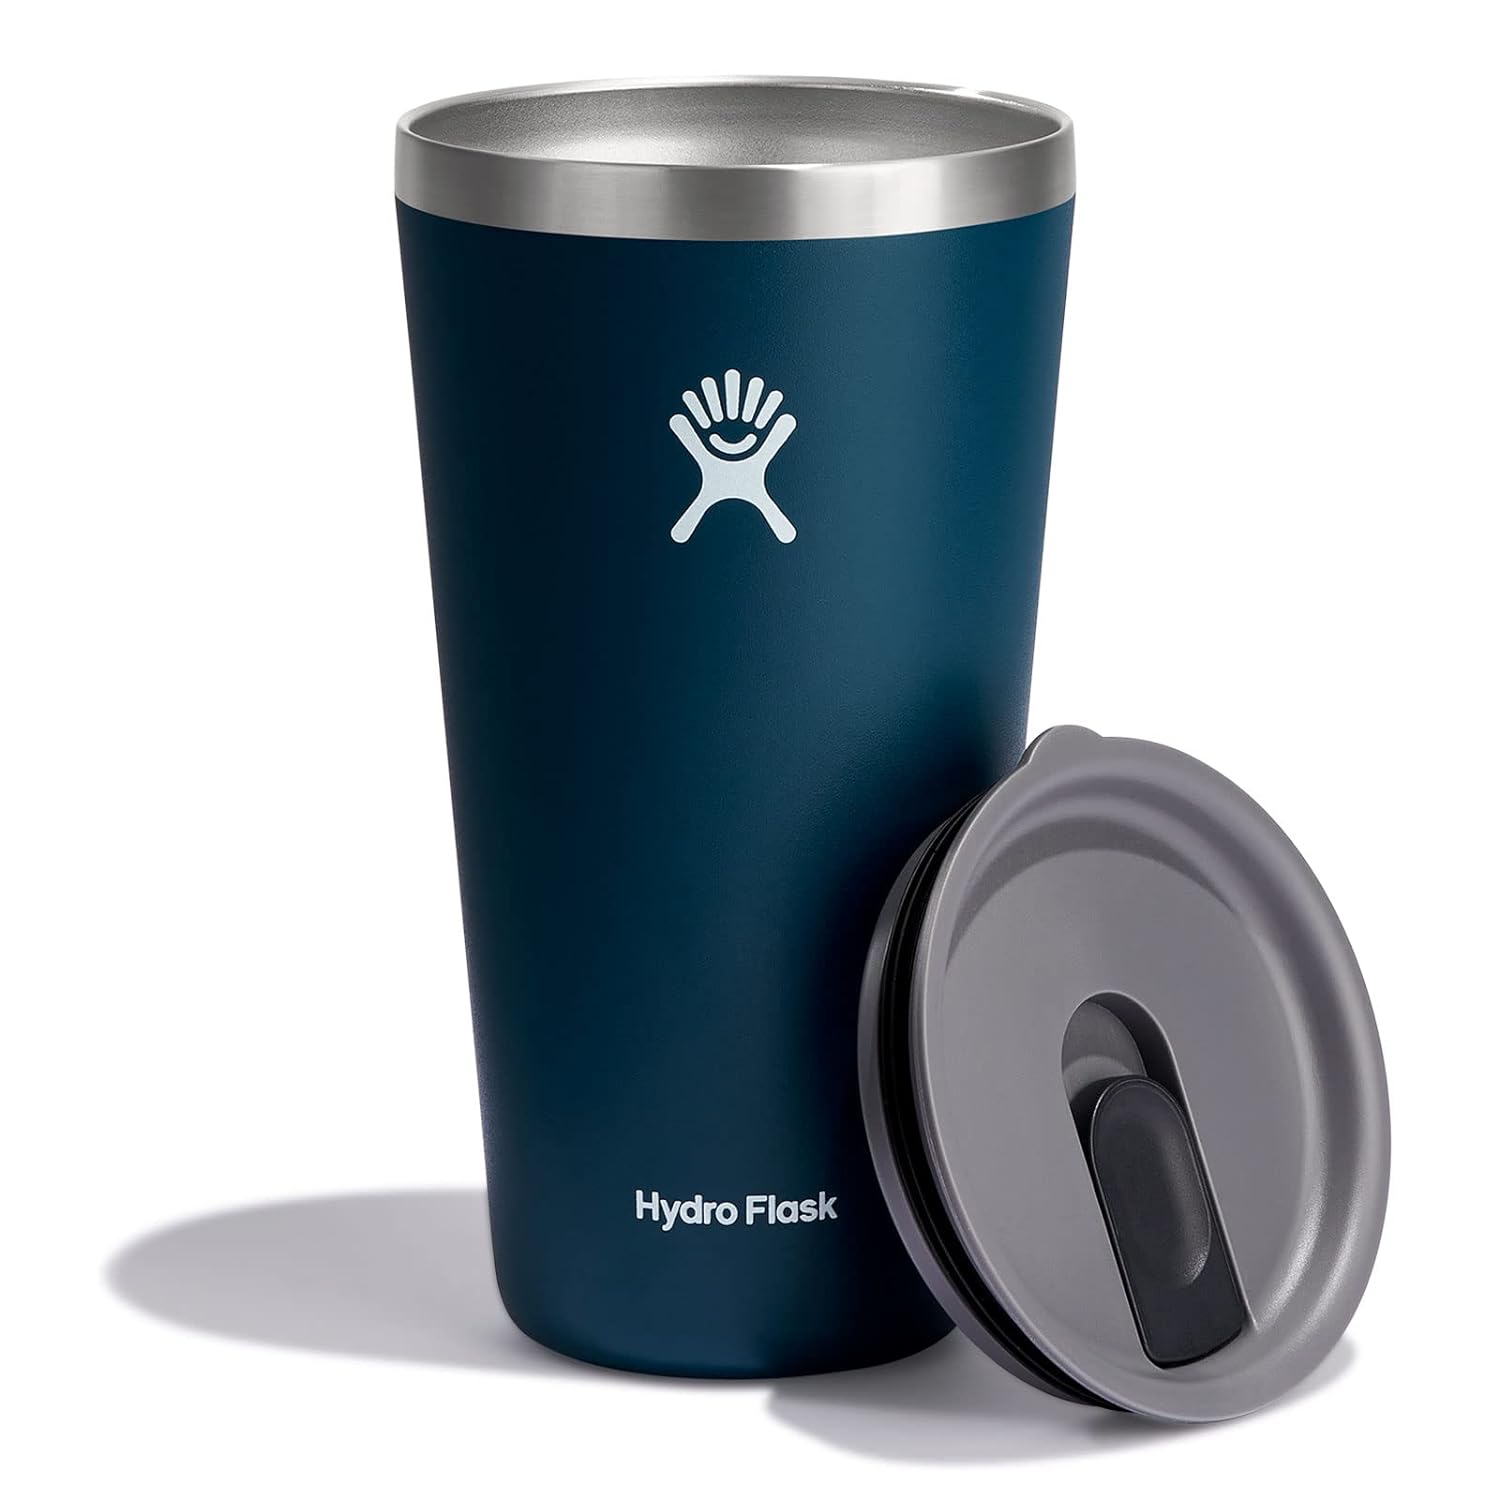 Hydro Flask All Around Tumbler with Closeable Press-in Lid - Insulated Water Bottle Travel Cup Coffee Mug